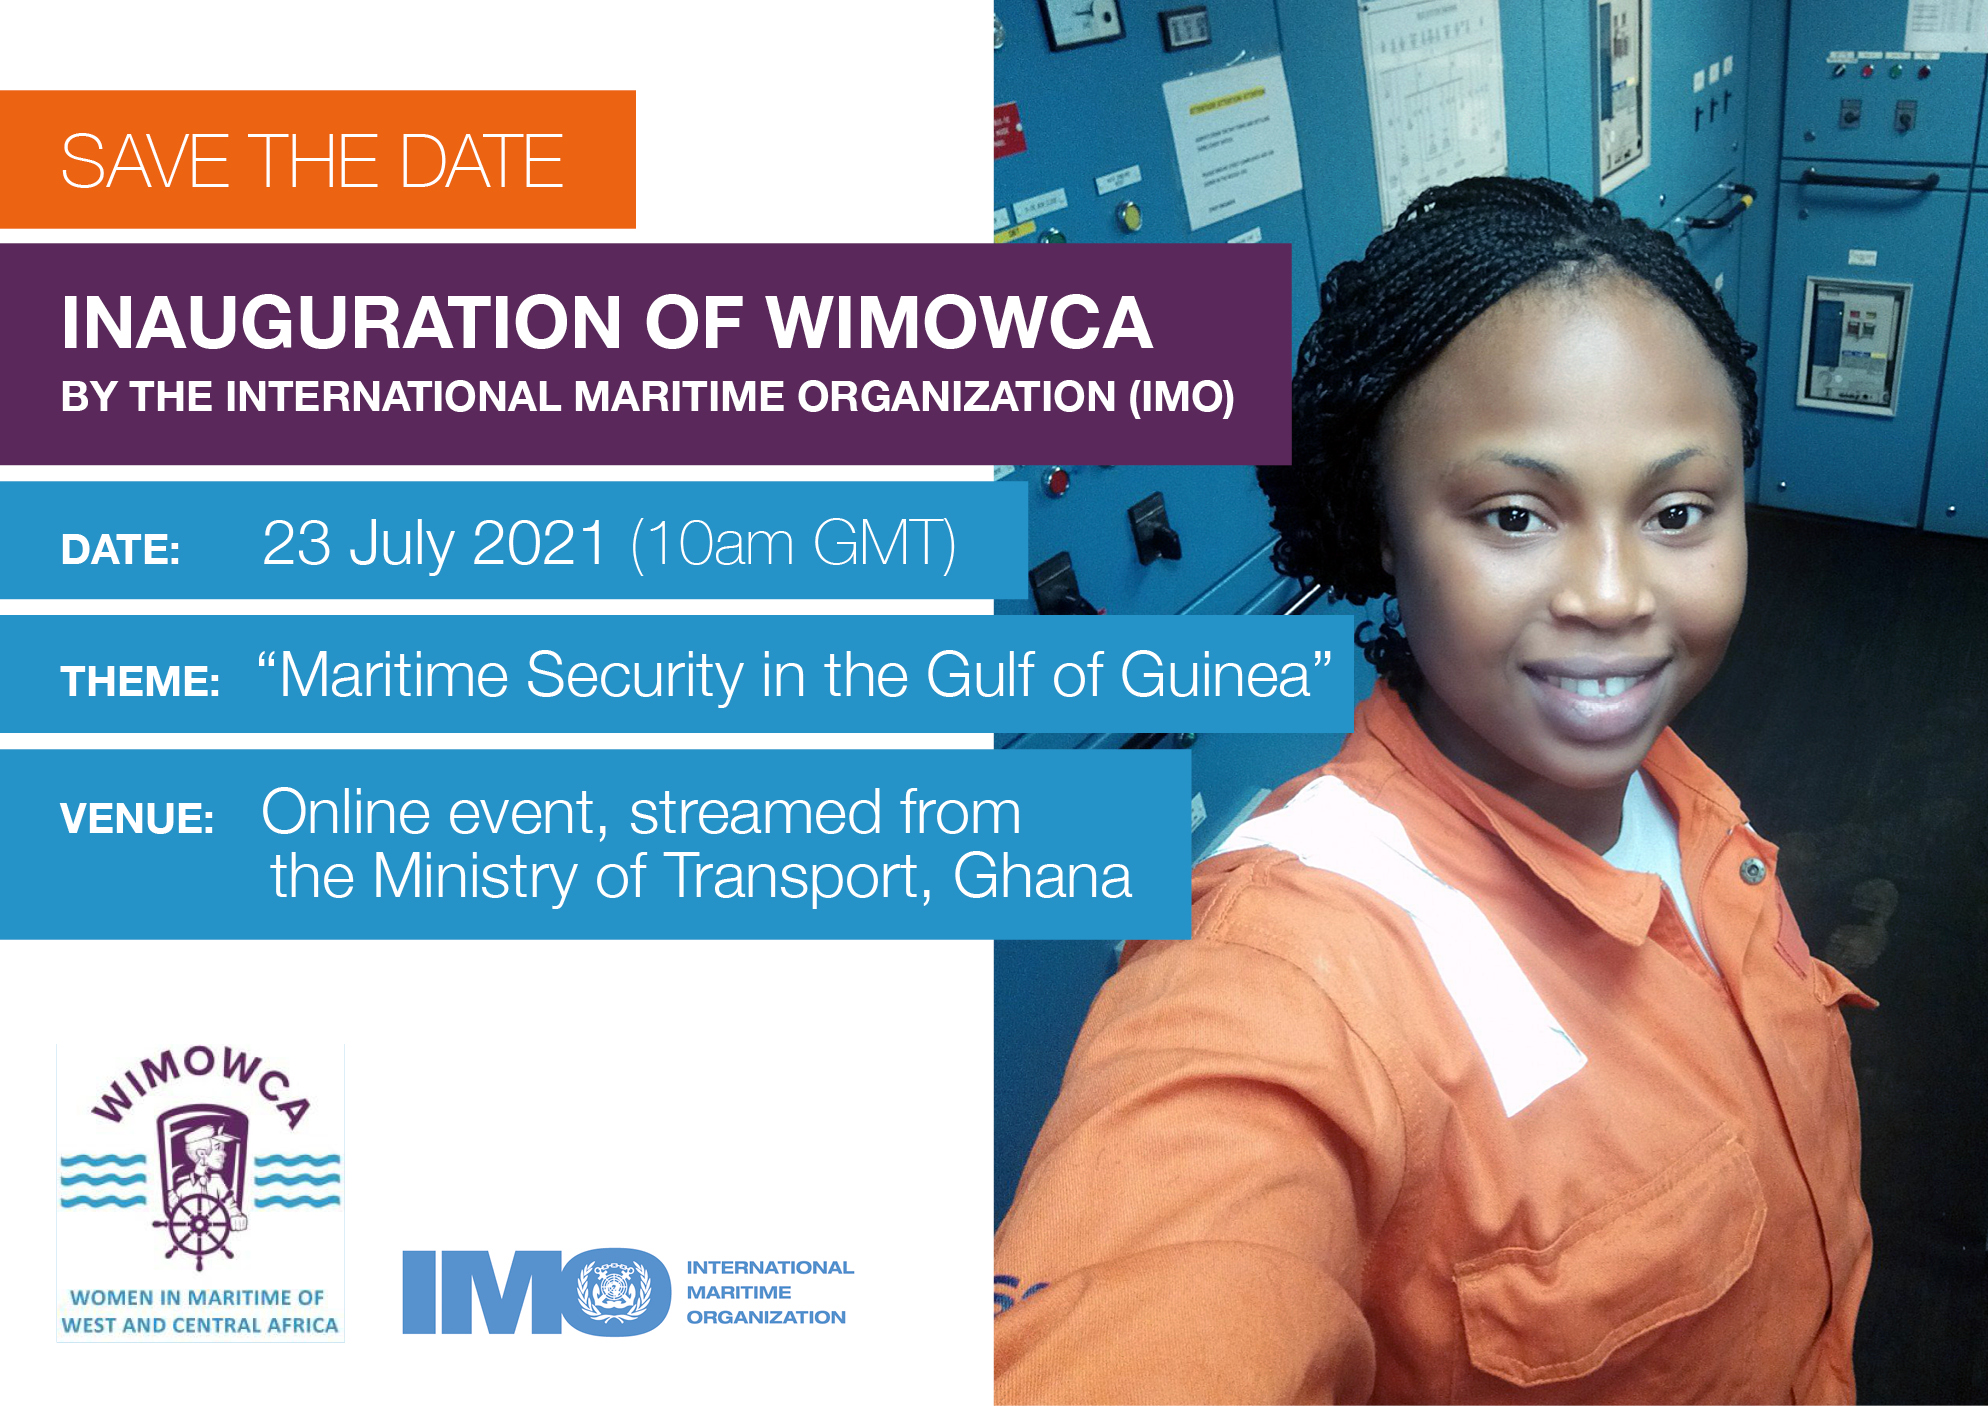 Inauguration of Women in Maritime of West and Central Africa (WIMOWCA) and conference on “Maritime security in the Gulf of Guinea” for the 23rd july